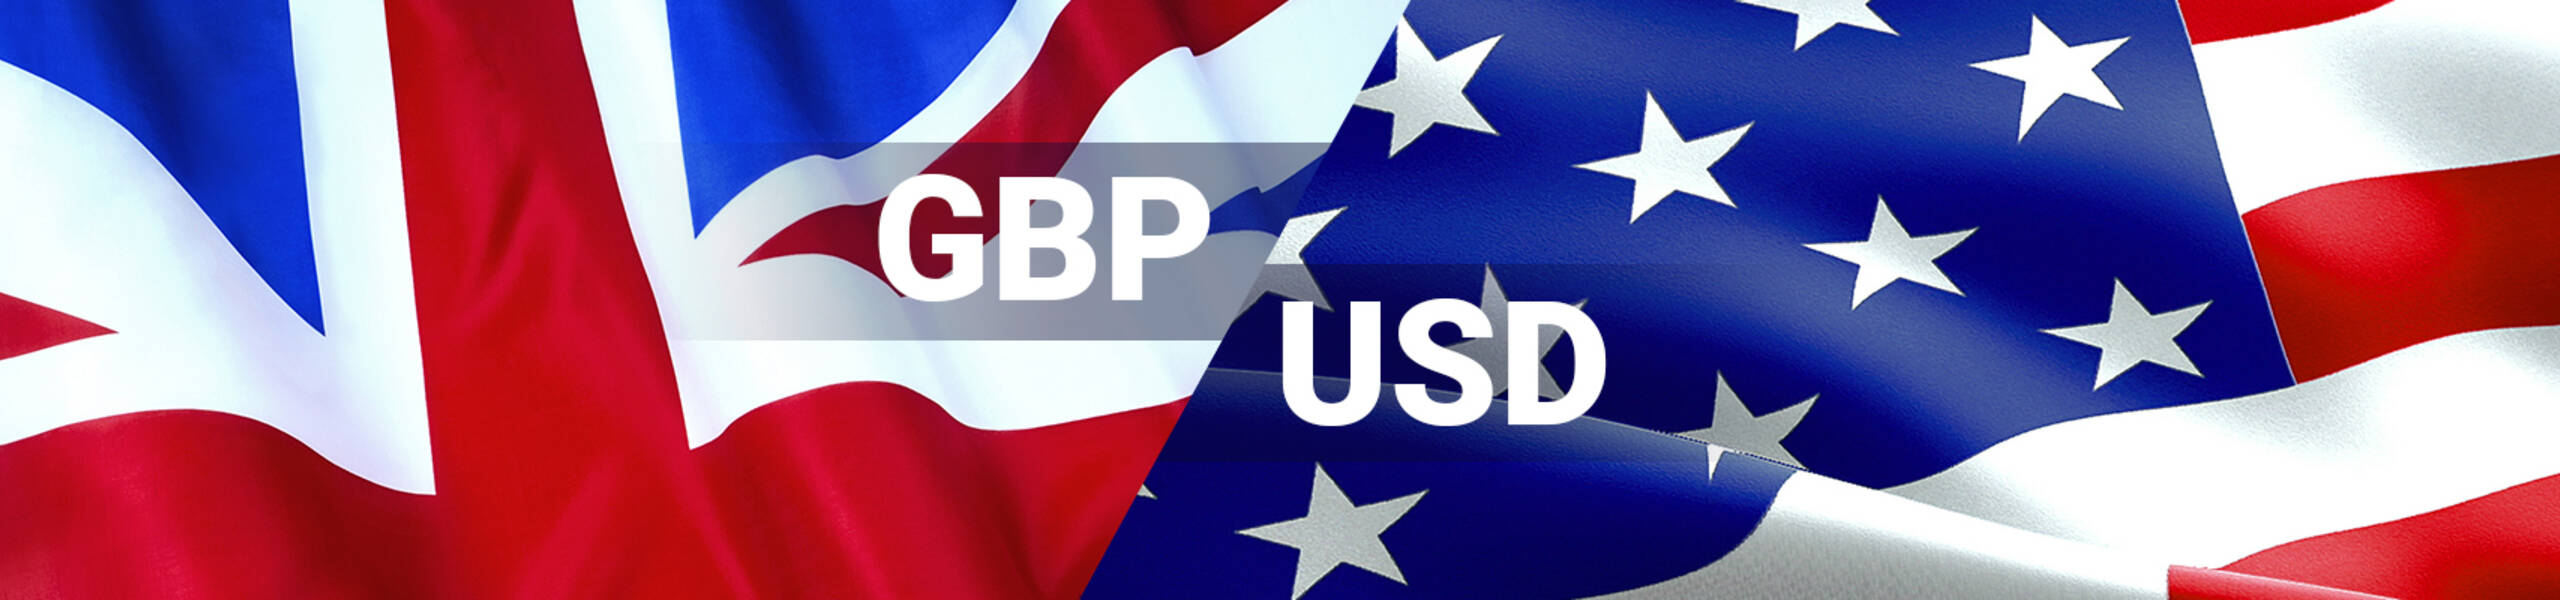 GBP/USD: pound in consolidation under Cloud